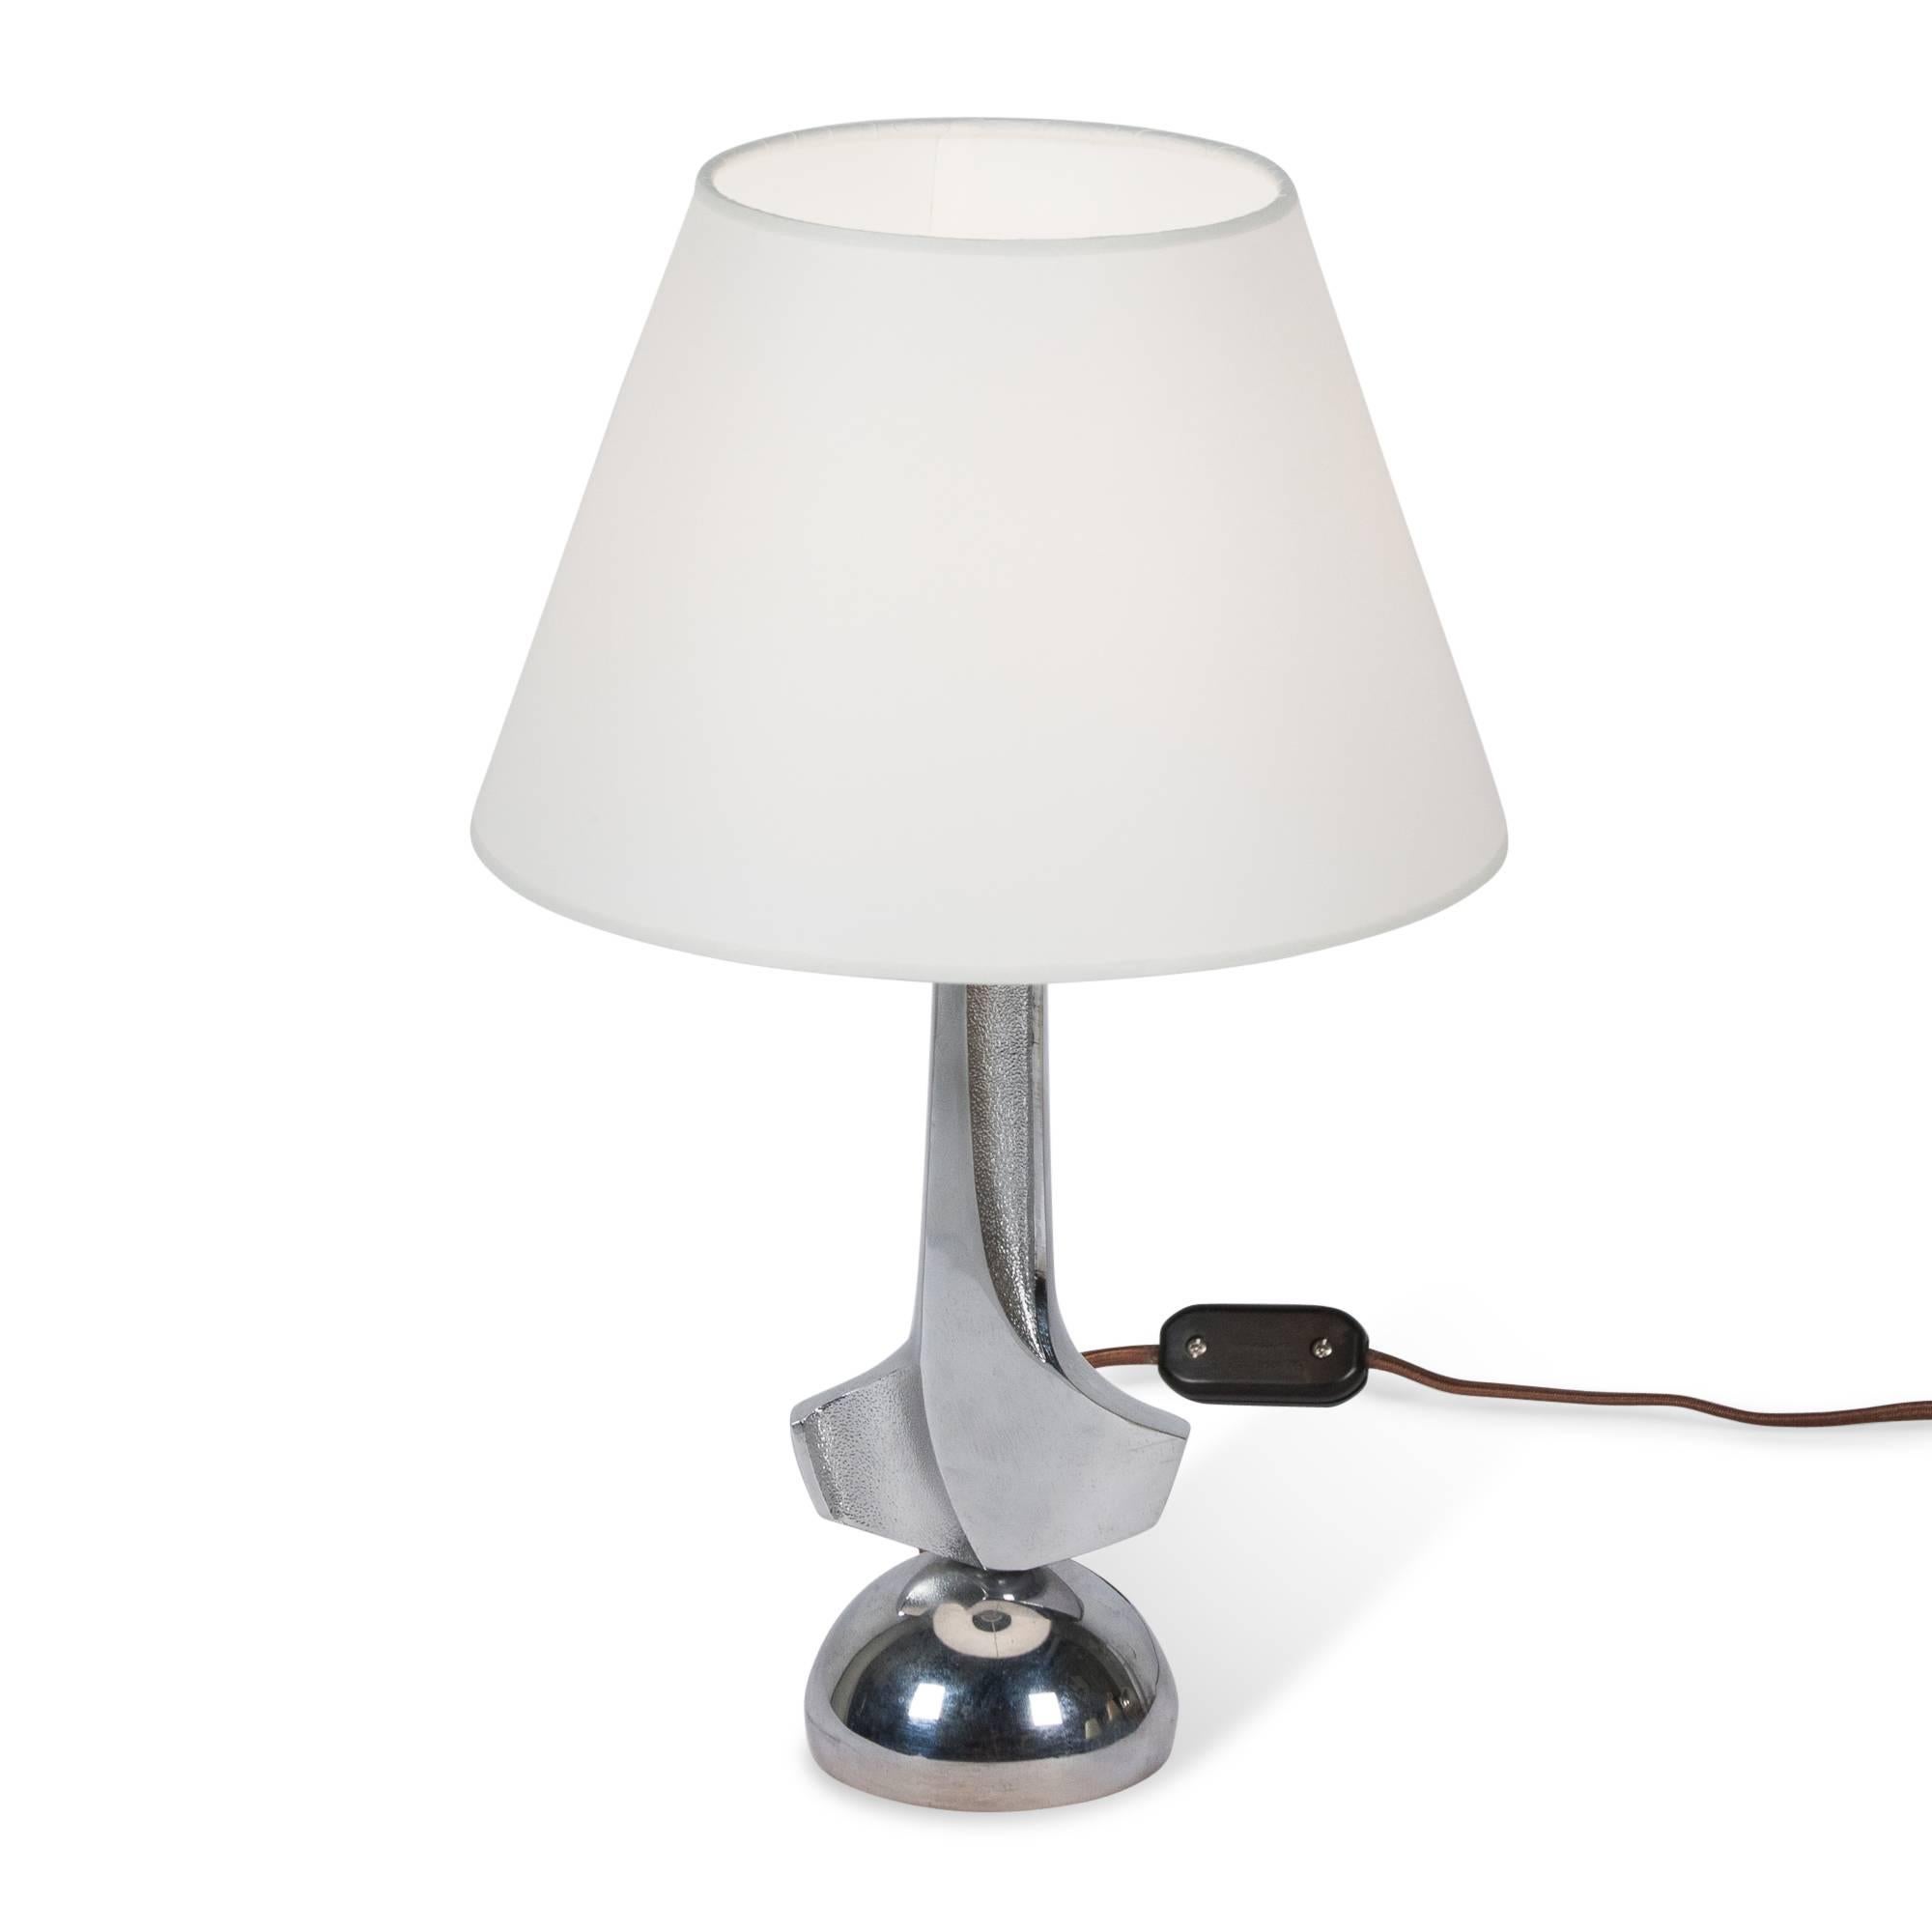 Chrome streamline style table lamp, tapered column with on a dome base, Italian 1930s. Measures: 4 in. D base, 14 in. H, 9 in. D shade at widest. 